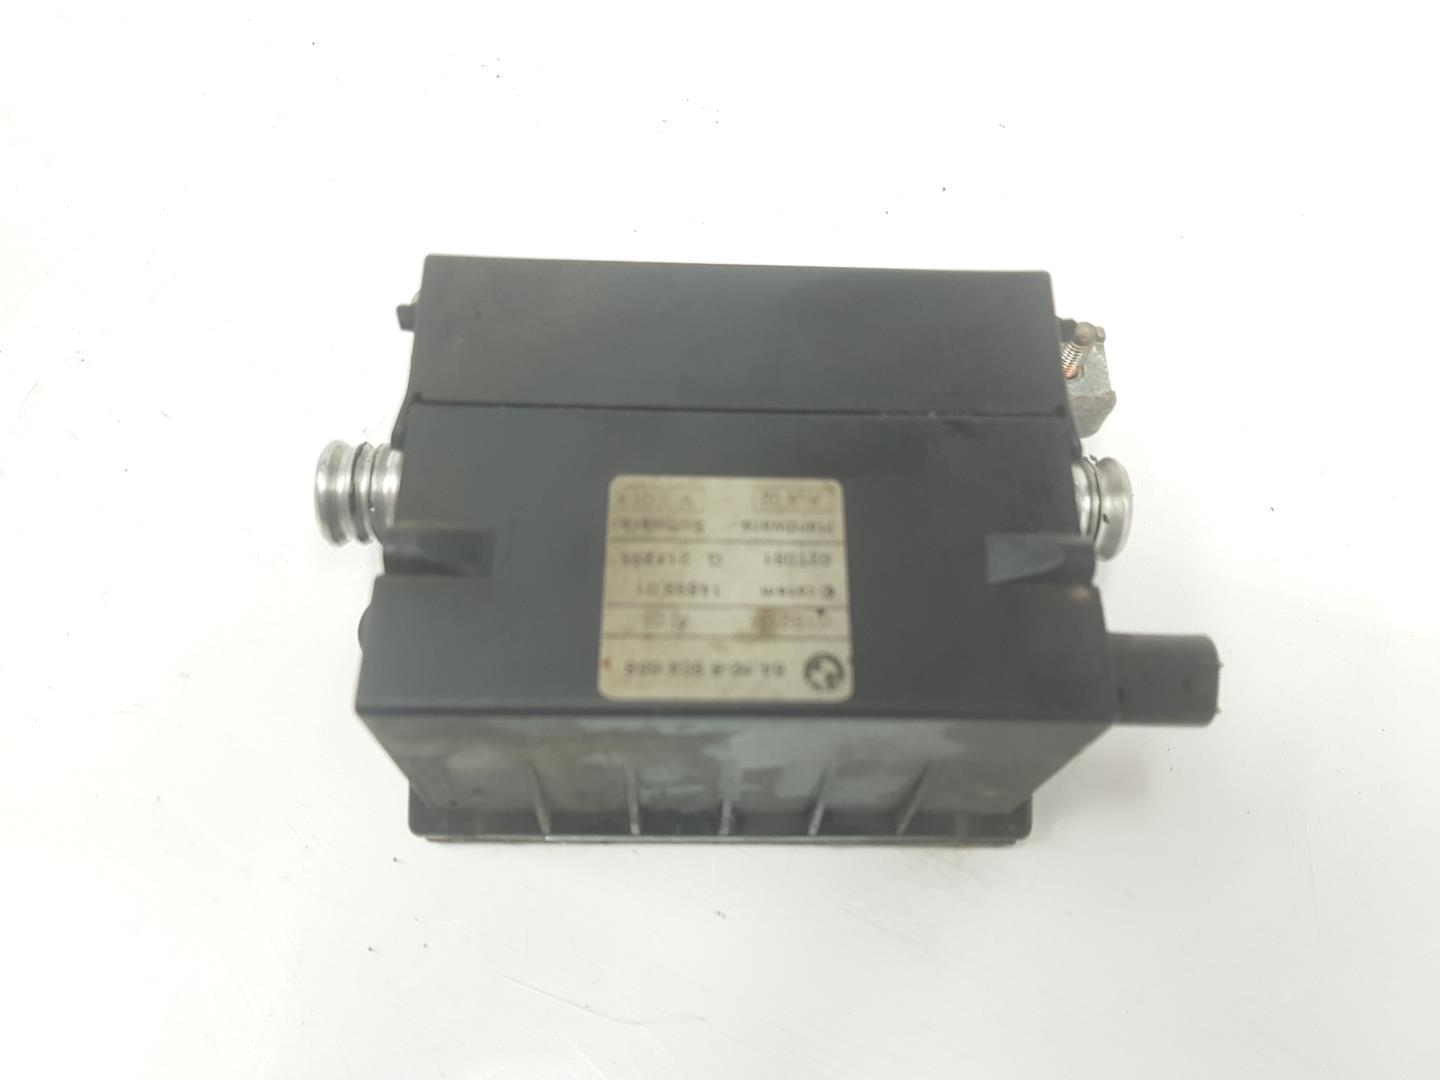 BMW 3 Series E46 (1997-2006) Other Control Units 64126904668, 64126902238 19910220